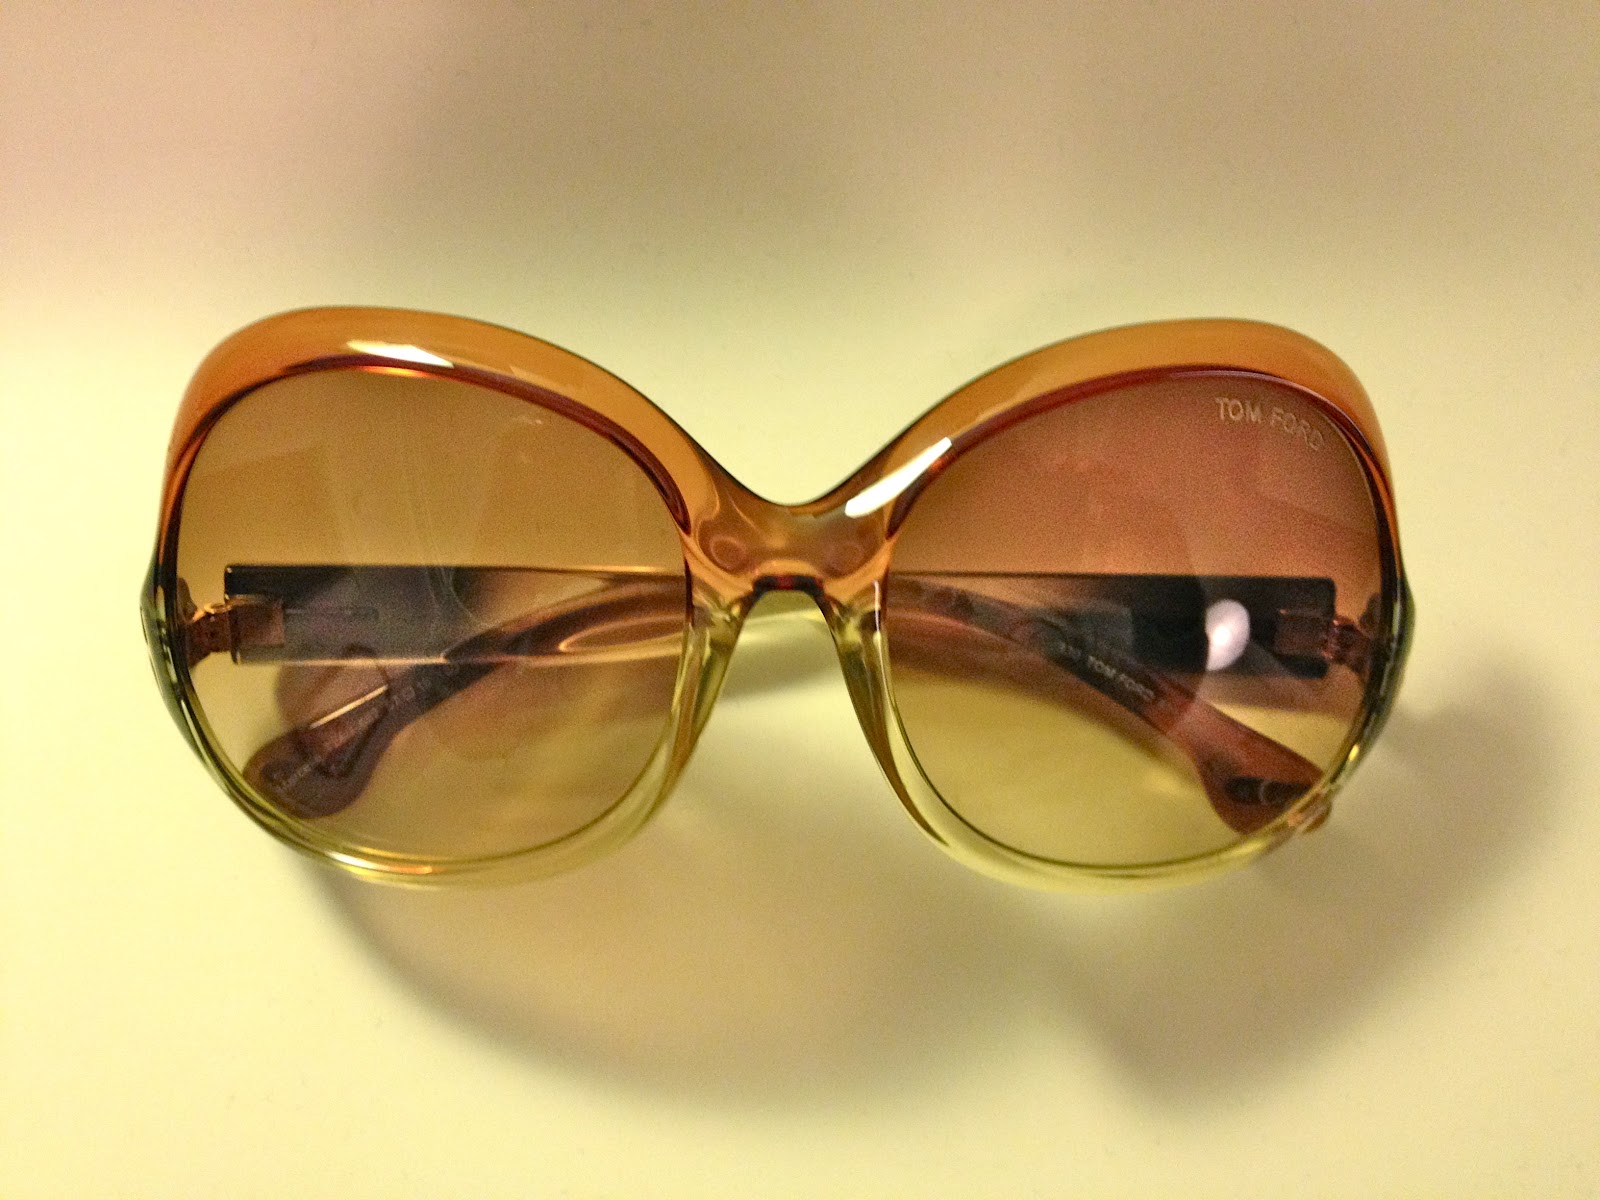 laws of general economy: Tom Ford Marcella Sunglasses- NWT